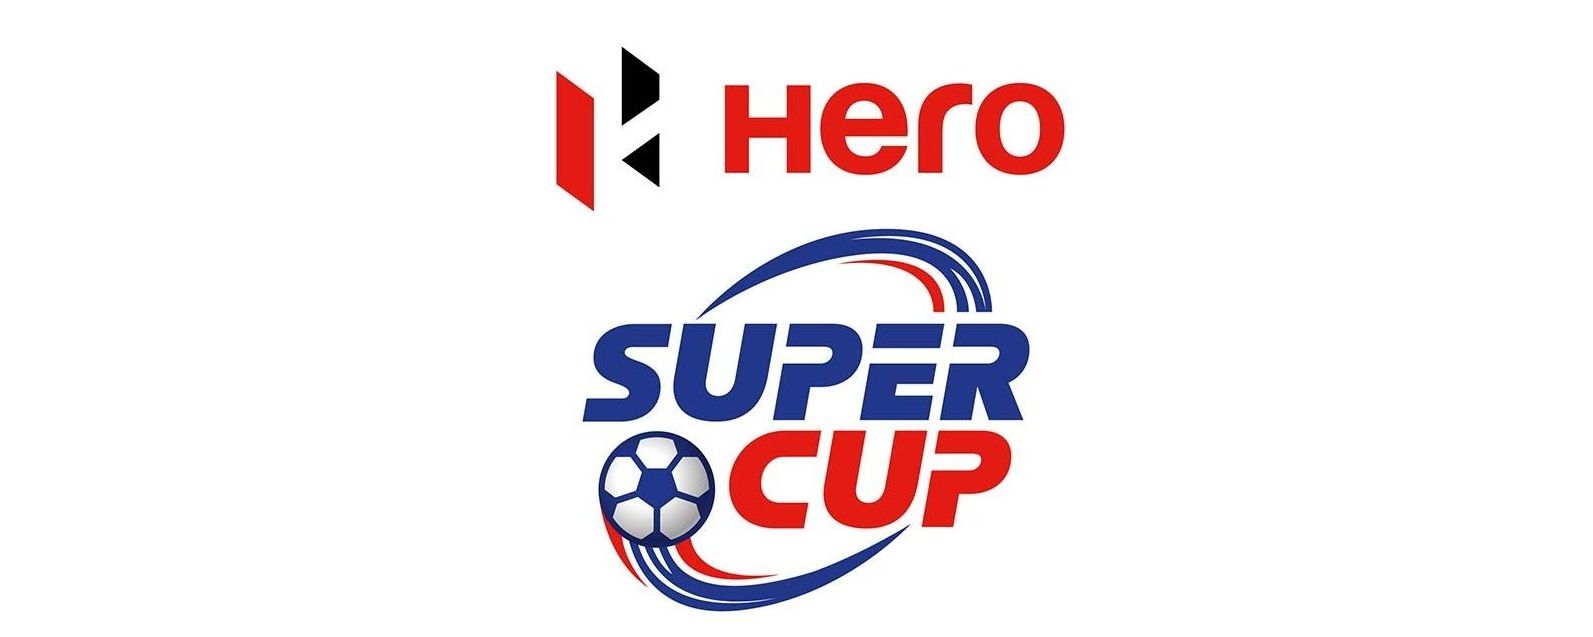 ISL Live - Watch Live Streaming & Telecast of Indian Super League 2014 10